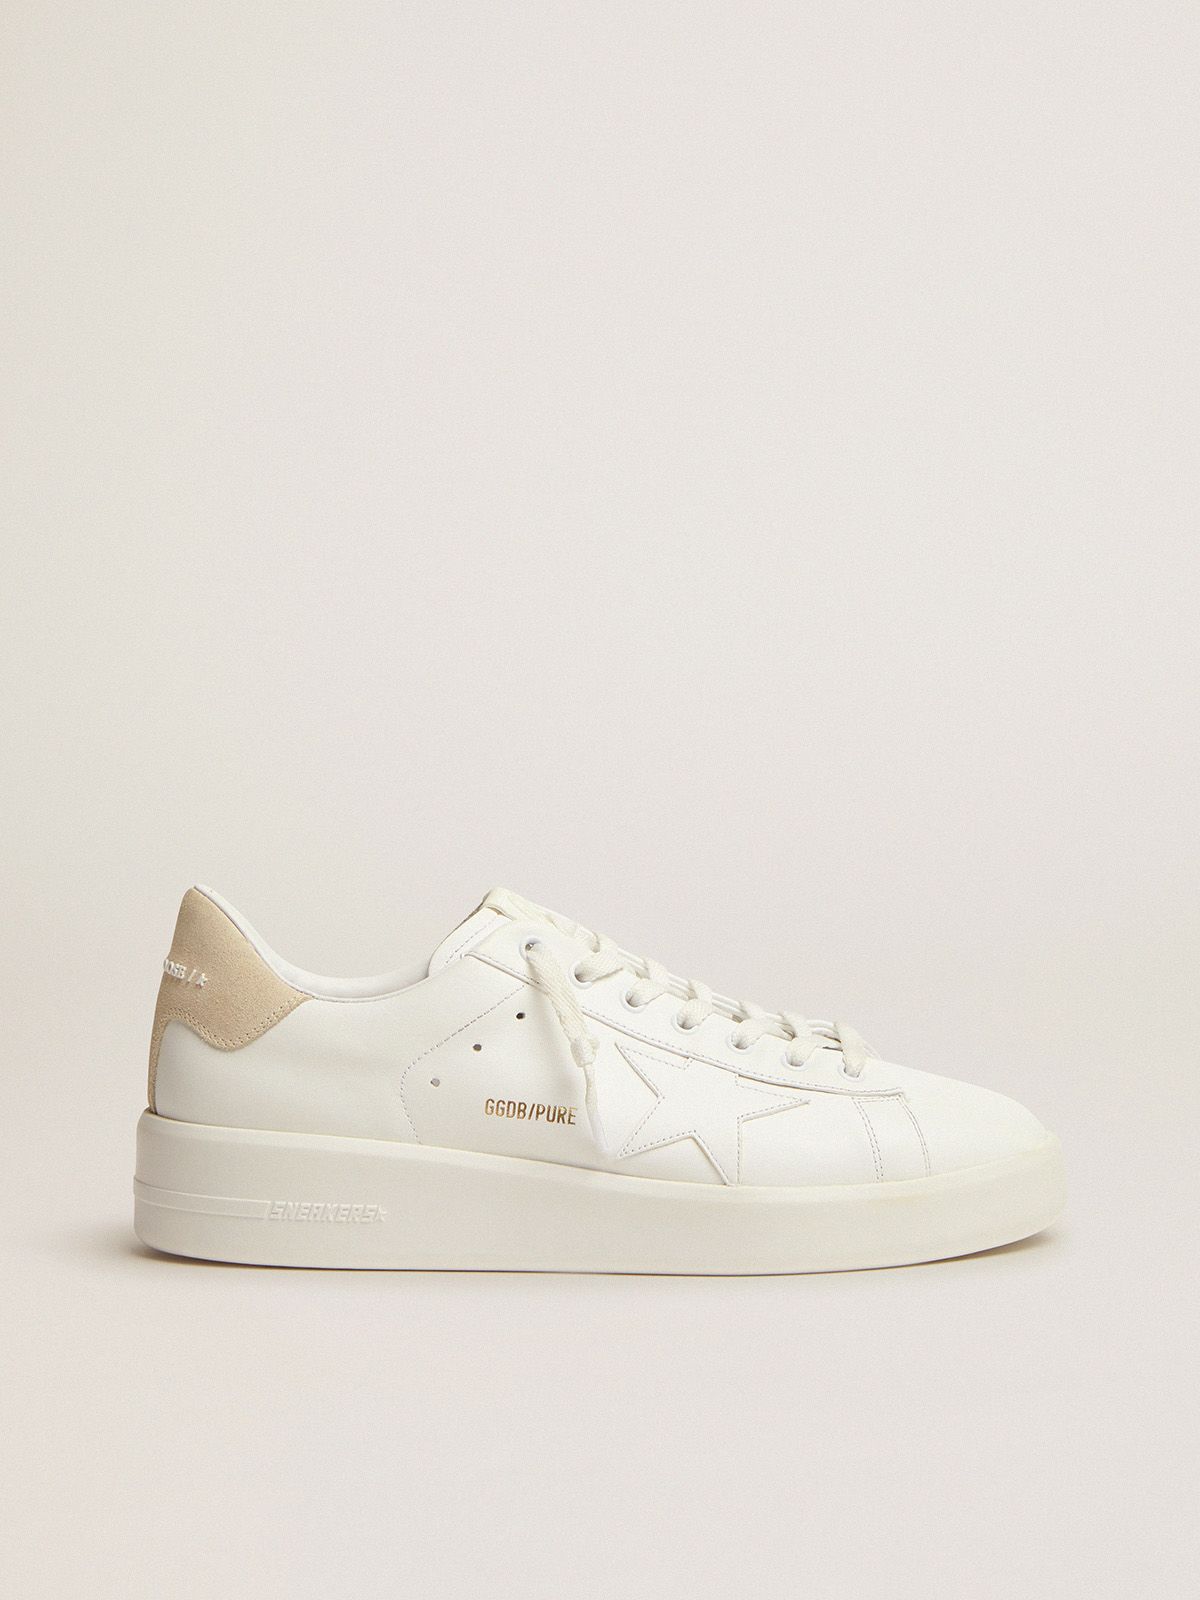 golden goose heel sneakers Purestar in with white leather cream tab suede